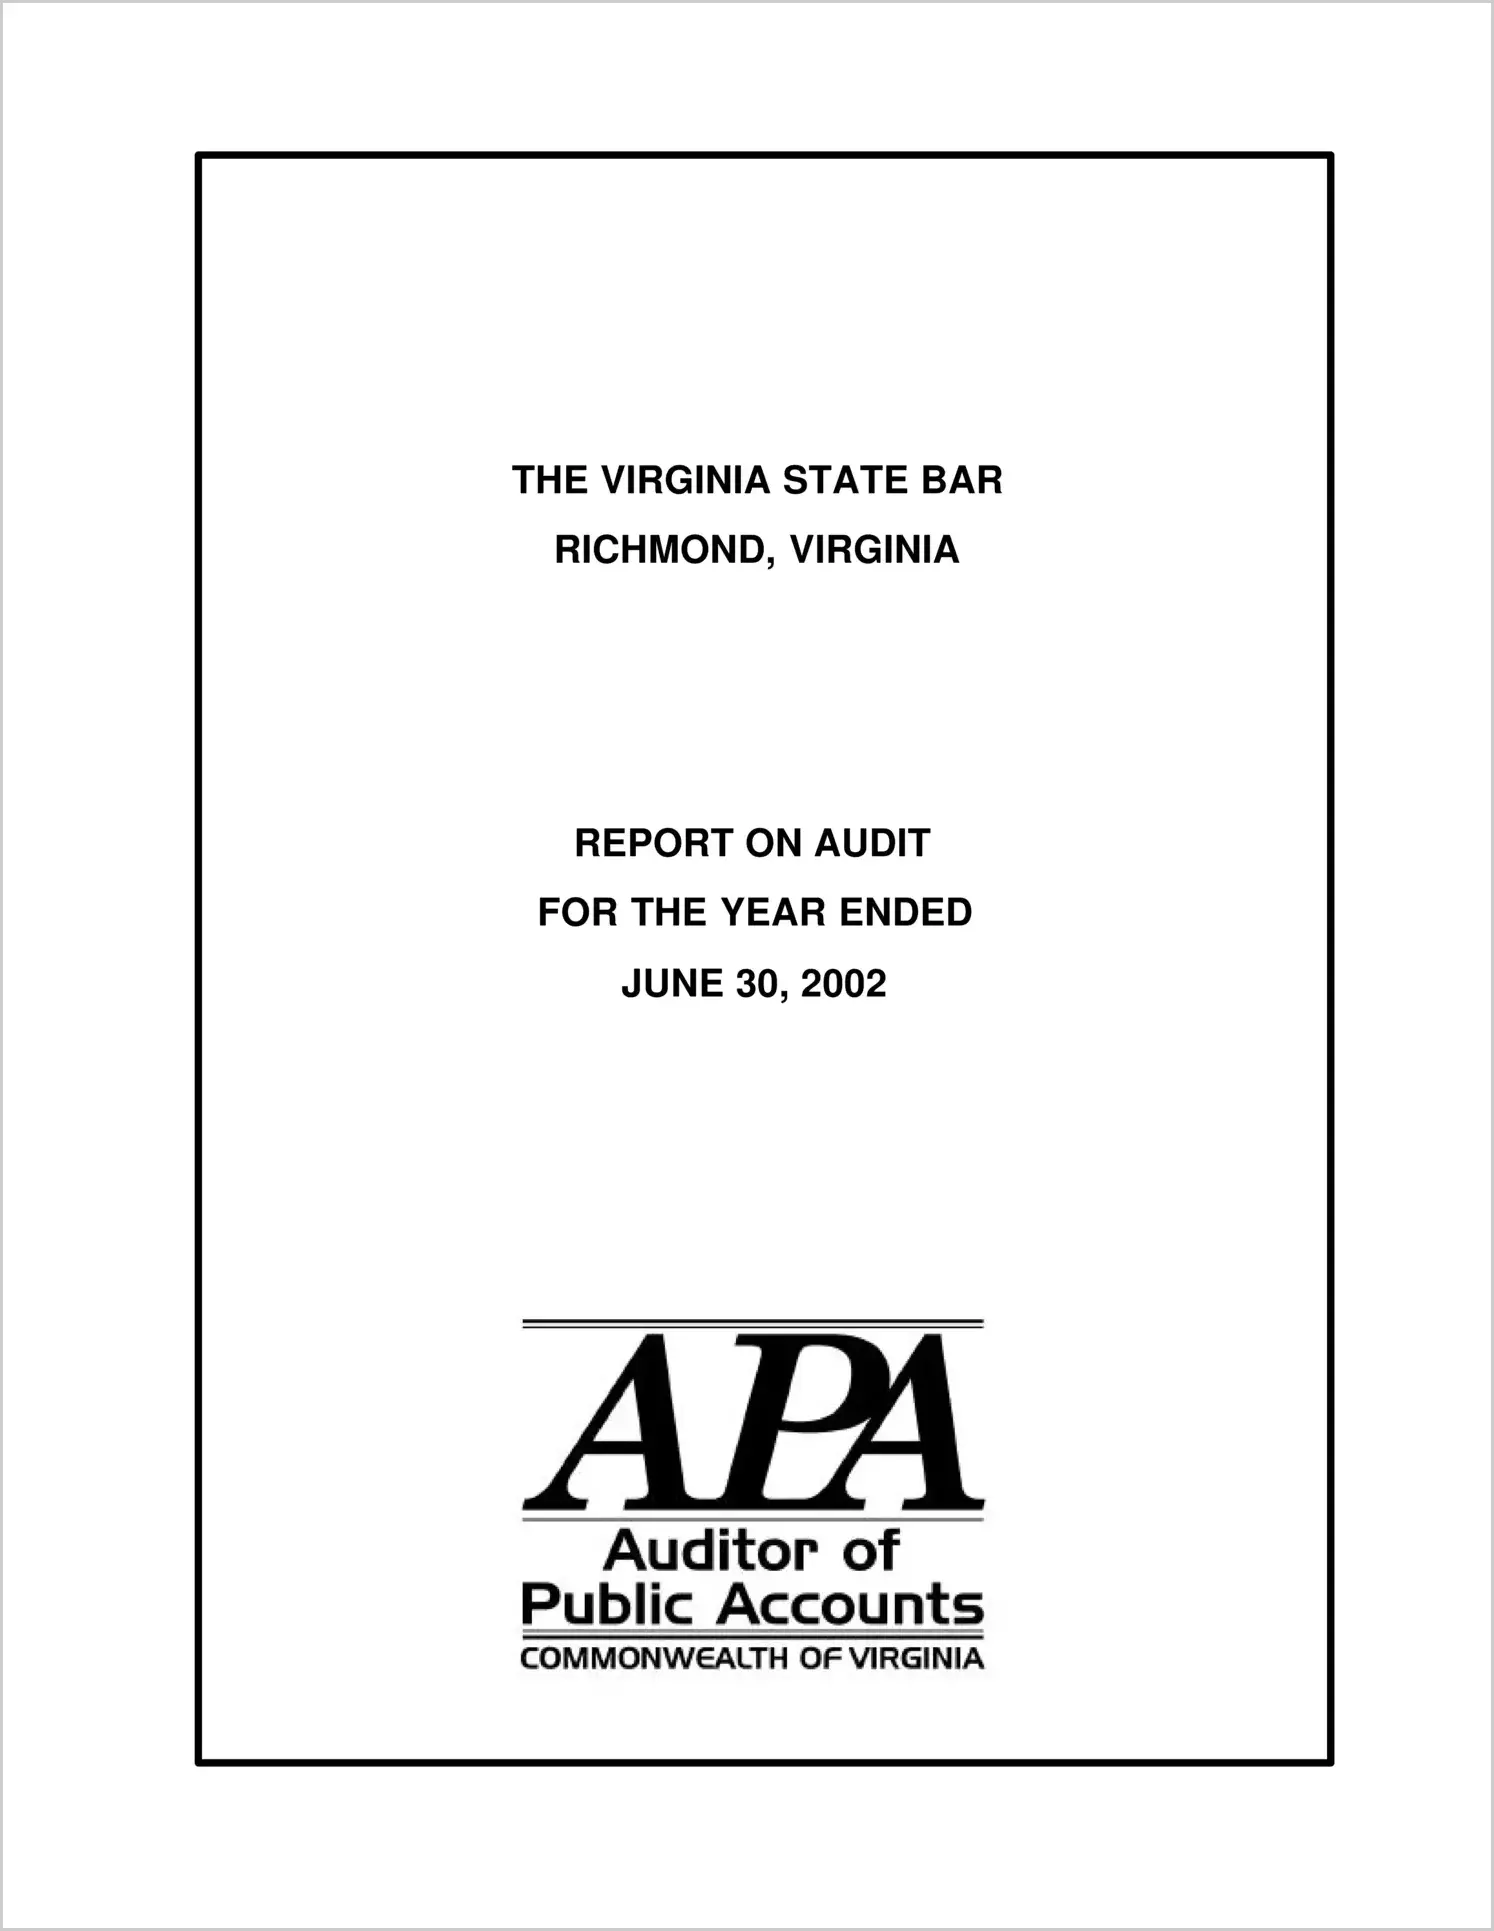 Virginia State Bar for the year ended June 30, 2002